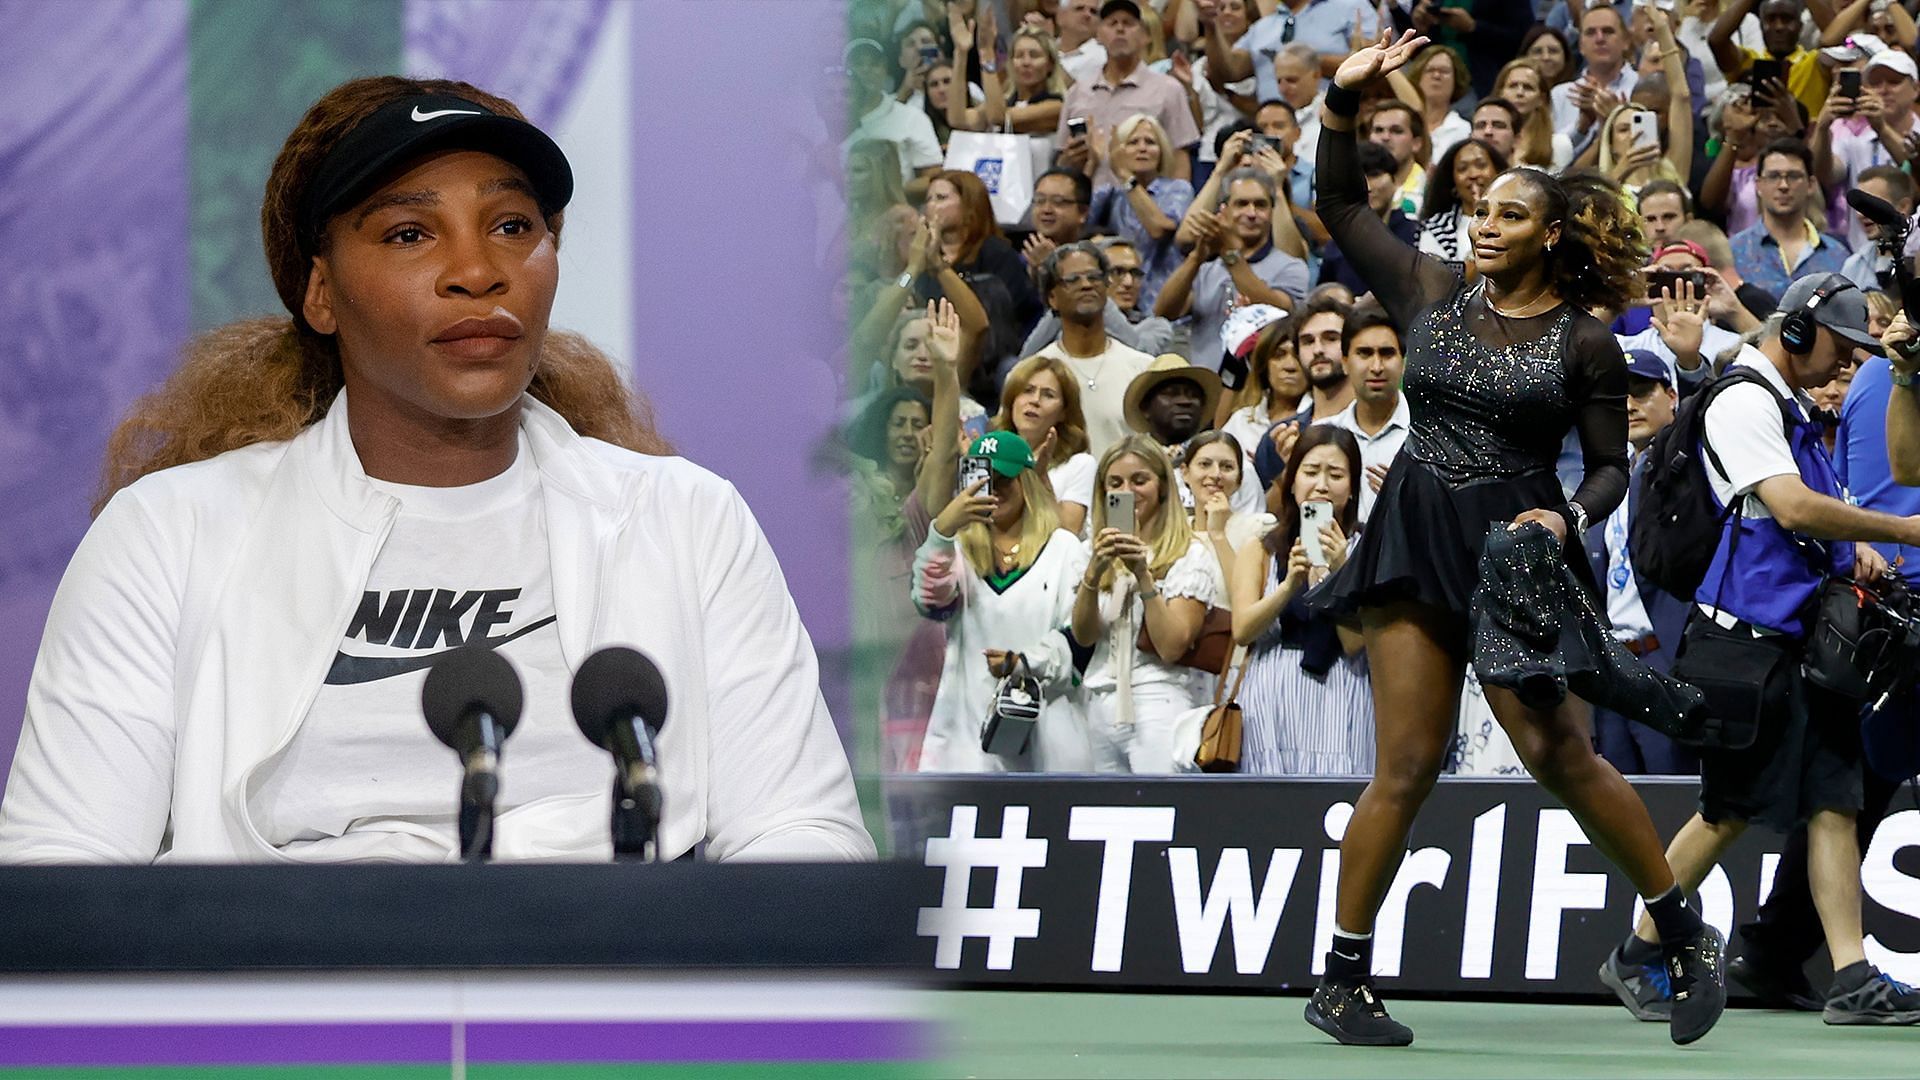 Serena Williams retired at the US Open last year.